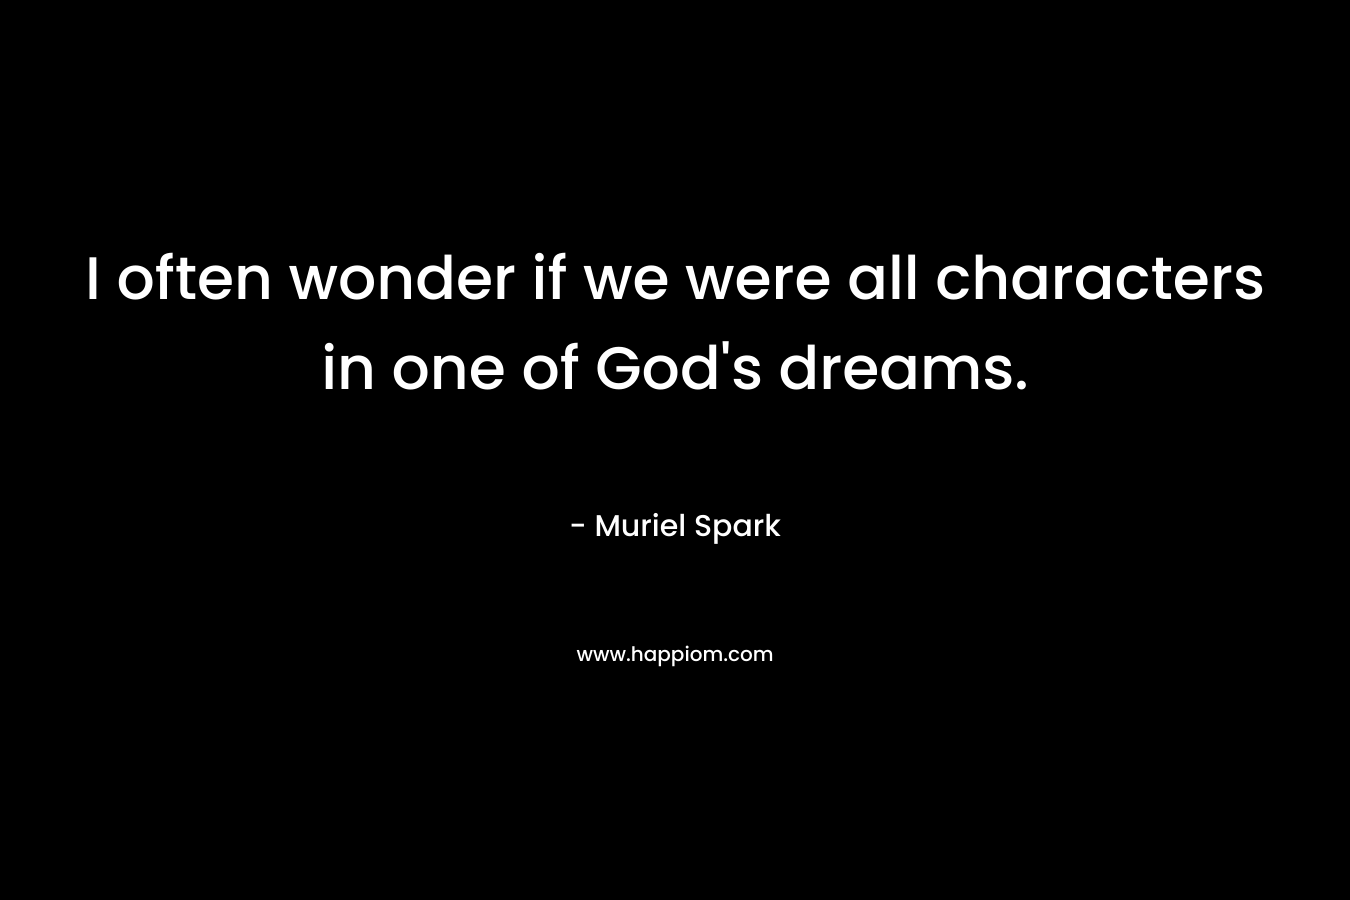 I often wonder if we were all characters in one of God’s dreams. – Muriel Spark